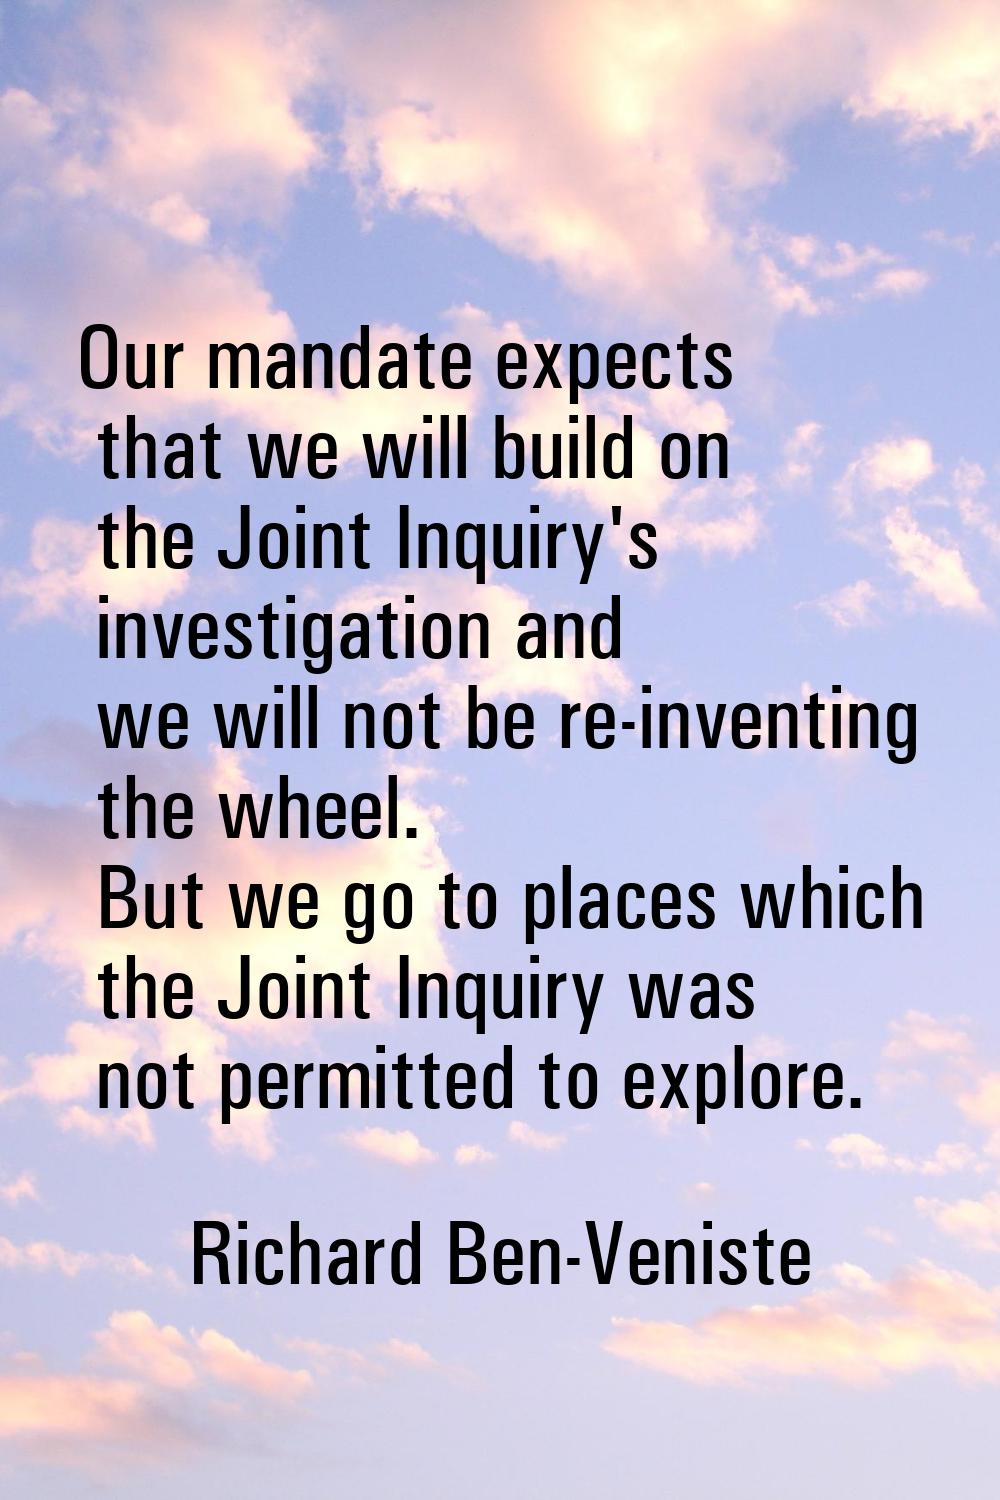 Our mandate expects that we will build on the Joint Inquiry's investigation and we will not be re-i